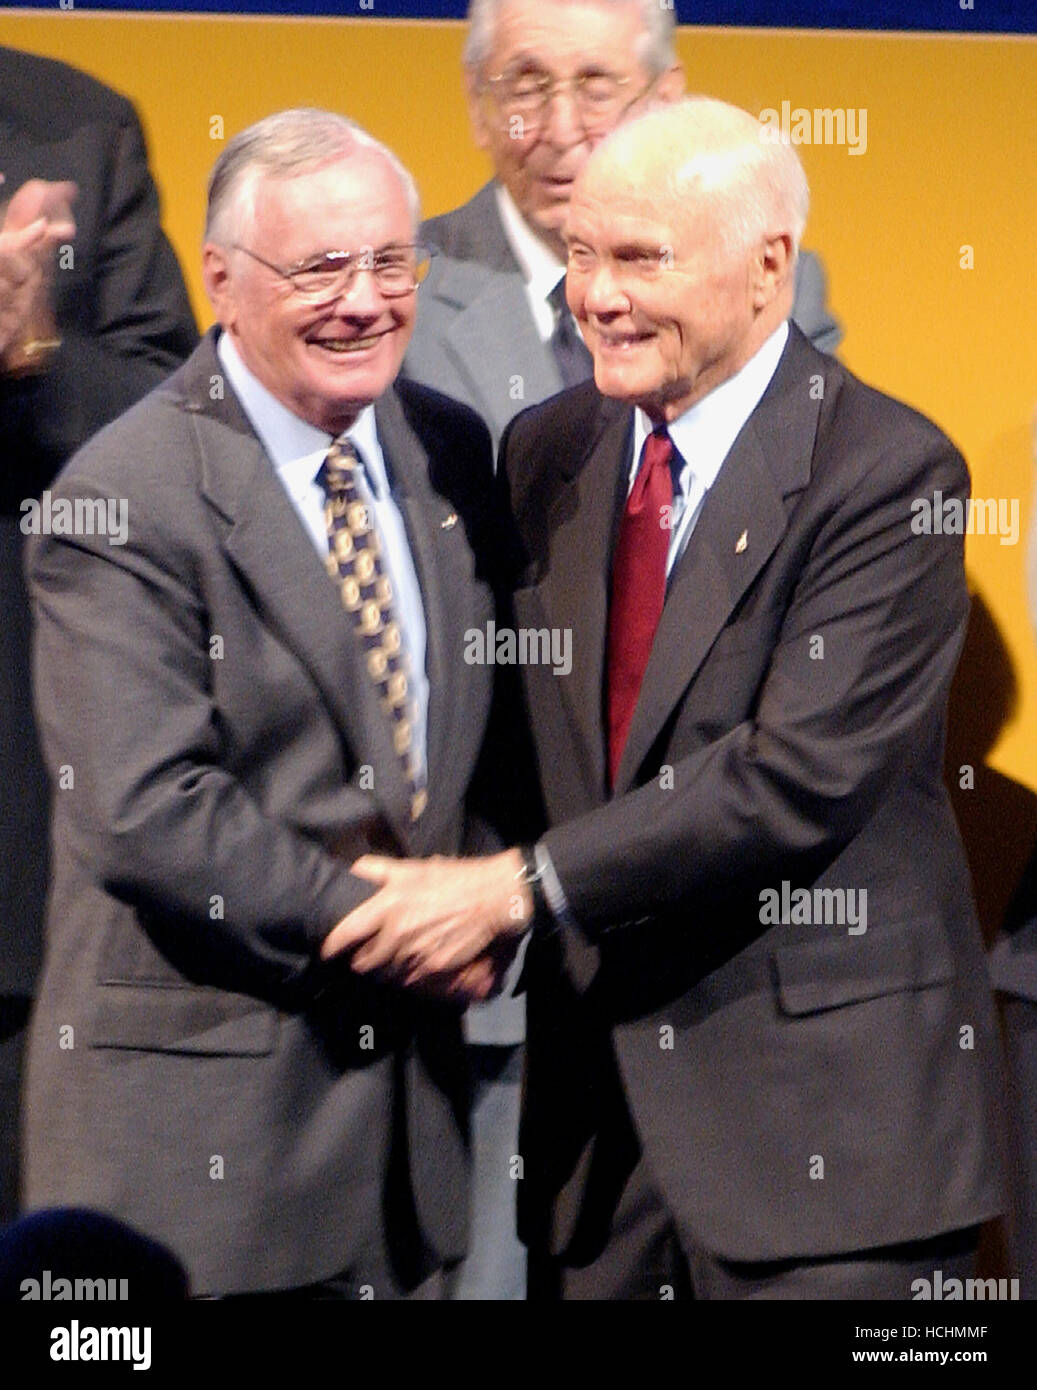 Space pioneers Neil A. Armstrong and John H. Glenn share an embrace as they are introduced during the dedication of the National Air and Space Museum's Steven F. Udvar-Hazy Center in Chantilly, Virginia on December 11, 2003. Armstrong flew the X-15 rocket plane, was the mission commander for Gemini 8, and on July 20, 1969, as commander of the Apollo 11 mission, ws the first human to walk on the Moon. Glenn became the first American to orbit the Earth on February 20, 1962. Subsequently, he served as a United States senator from Ohio and was a mission specialist on the space shuttle STS-95 mi Stock Photo